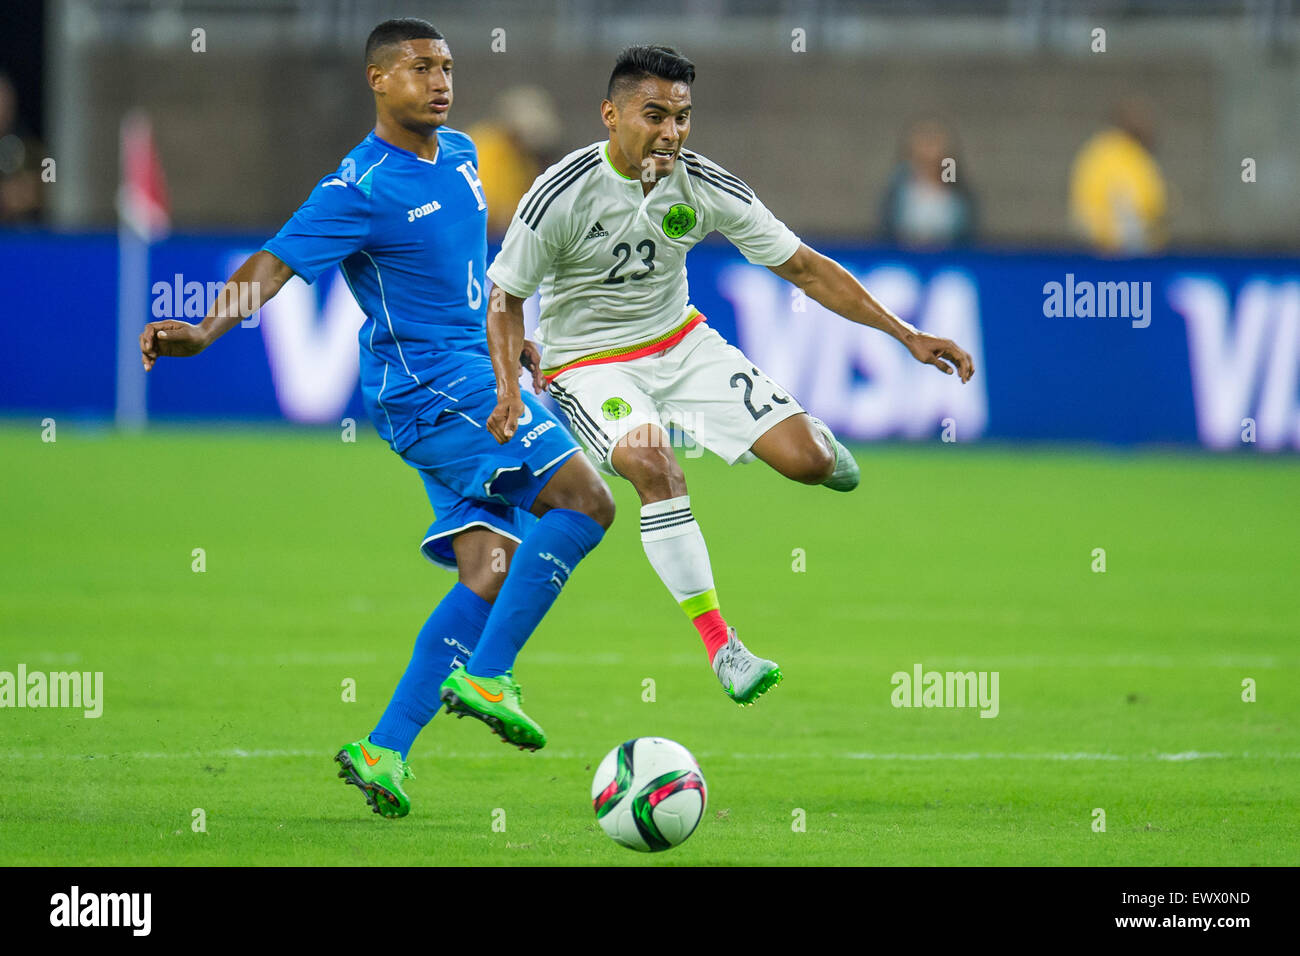 July 1, 2015: Mexico midfielder Jose Juan Vazquez (23) and Honduras midfielder Bryan Acosta (6) battle for the ball during the 2nd half of an international soccer match between Honduras and Mexico at NRG Stadium in Houston, TX. The game ended in a 0-0 draw.Trask Smith/CSM Stock Photo